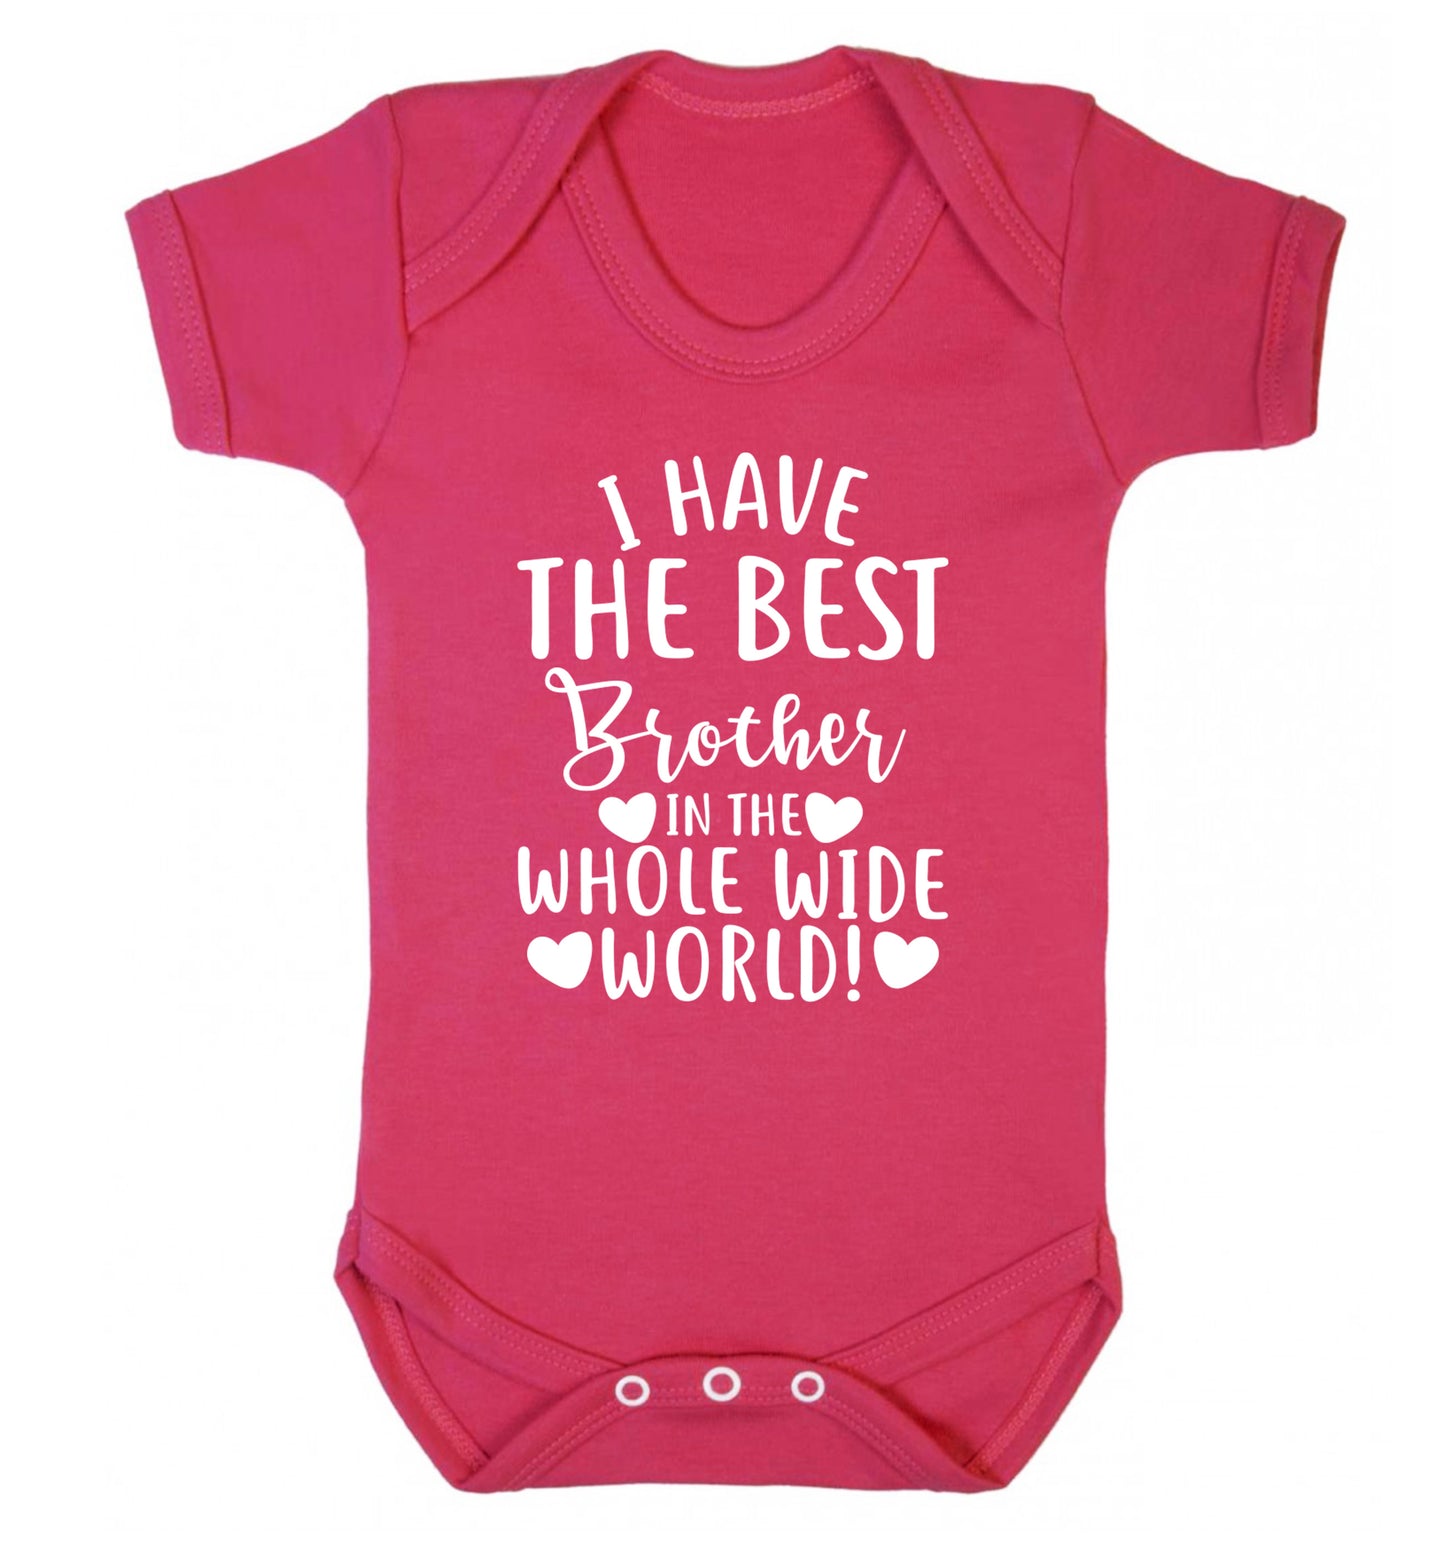 I have the best brother in the whole wide world! Baby Vest dark pink 18-24 months